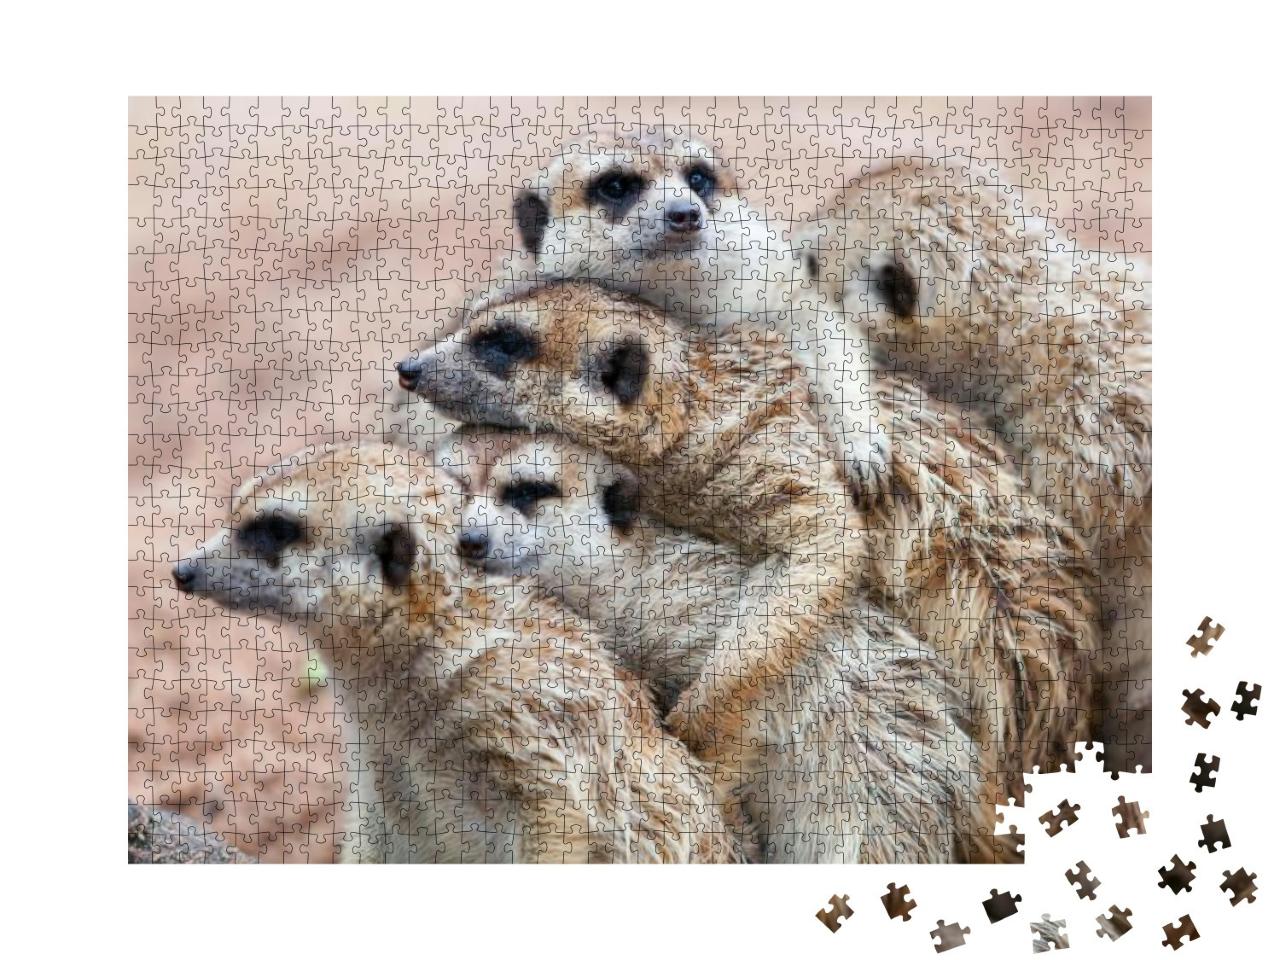 Group Hug Meerkat Standing on a Rainy Day Because of Cold... Jigsaw Puzzle with 1000 pieces